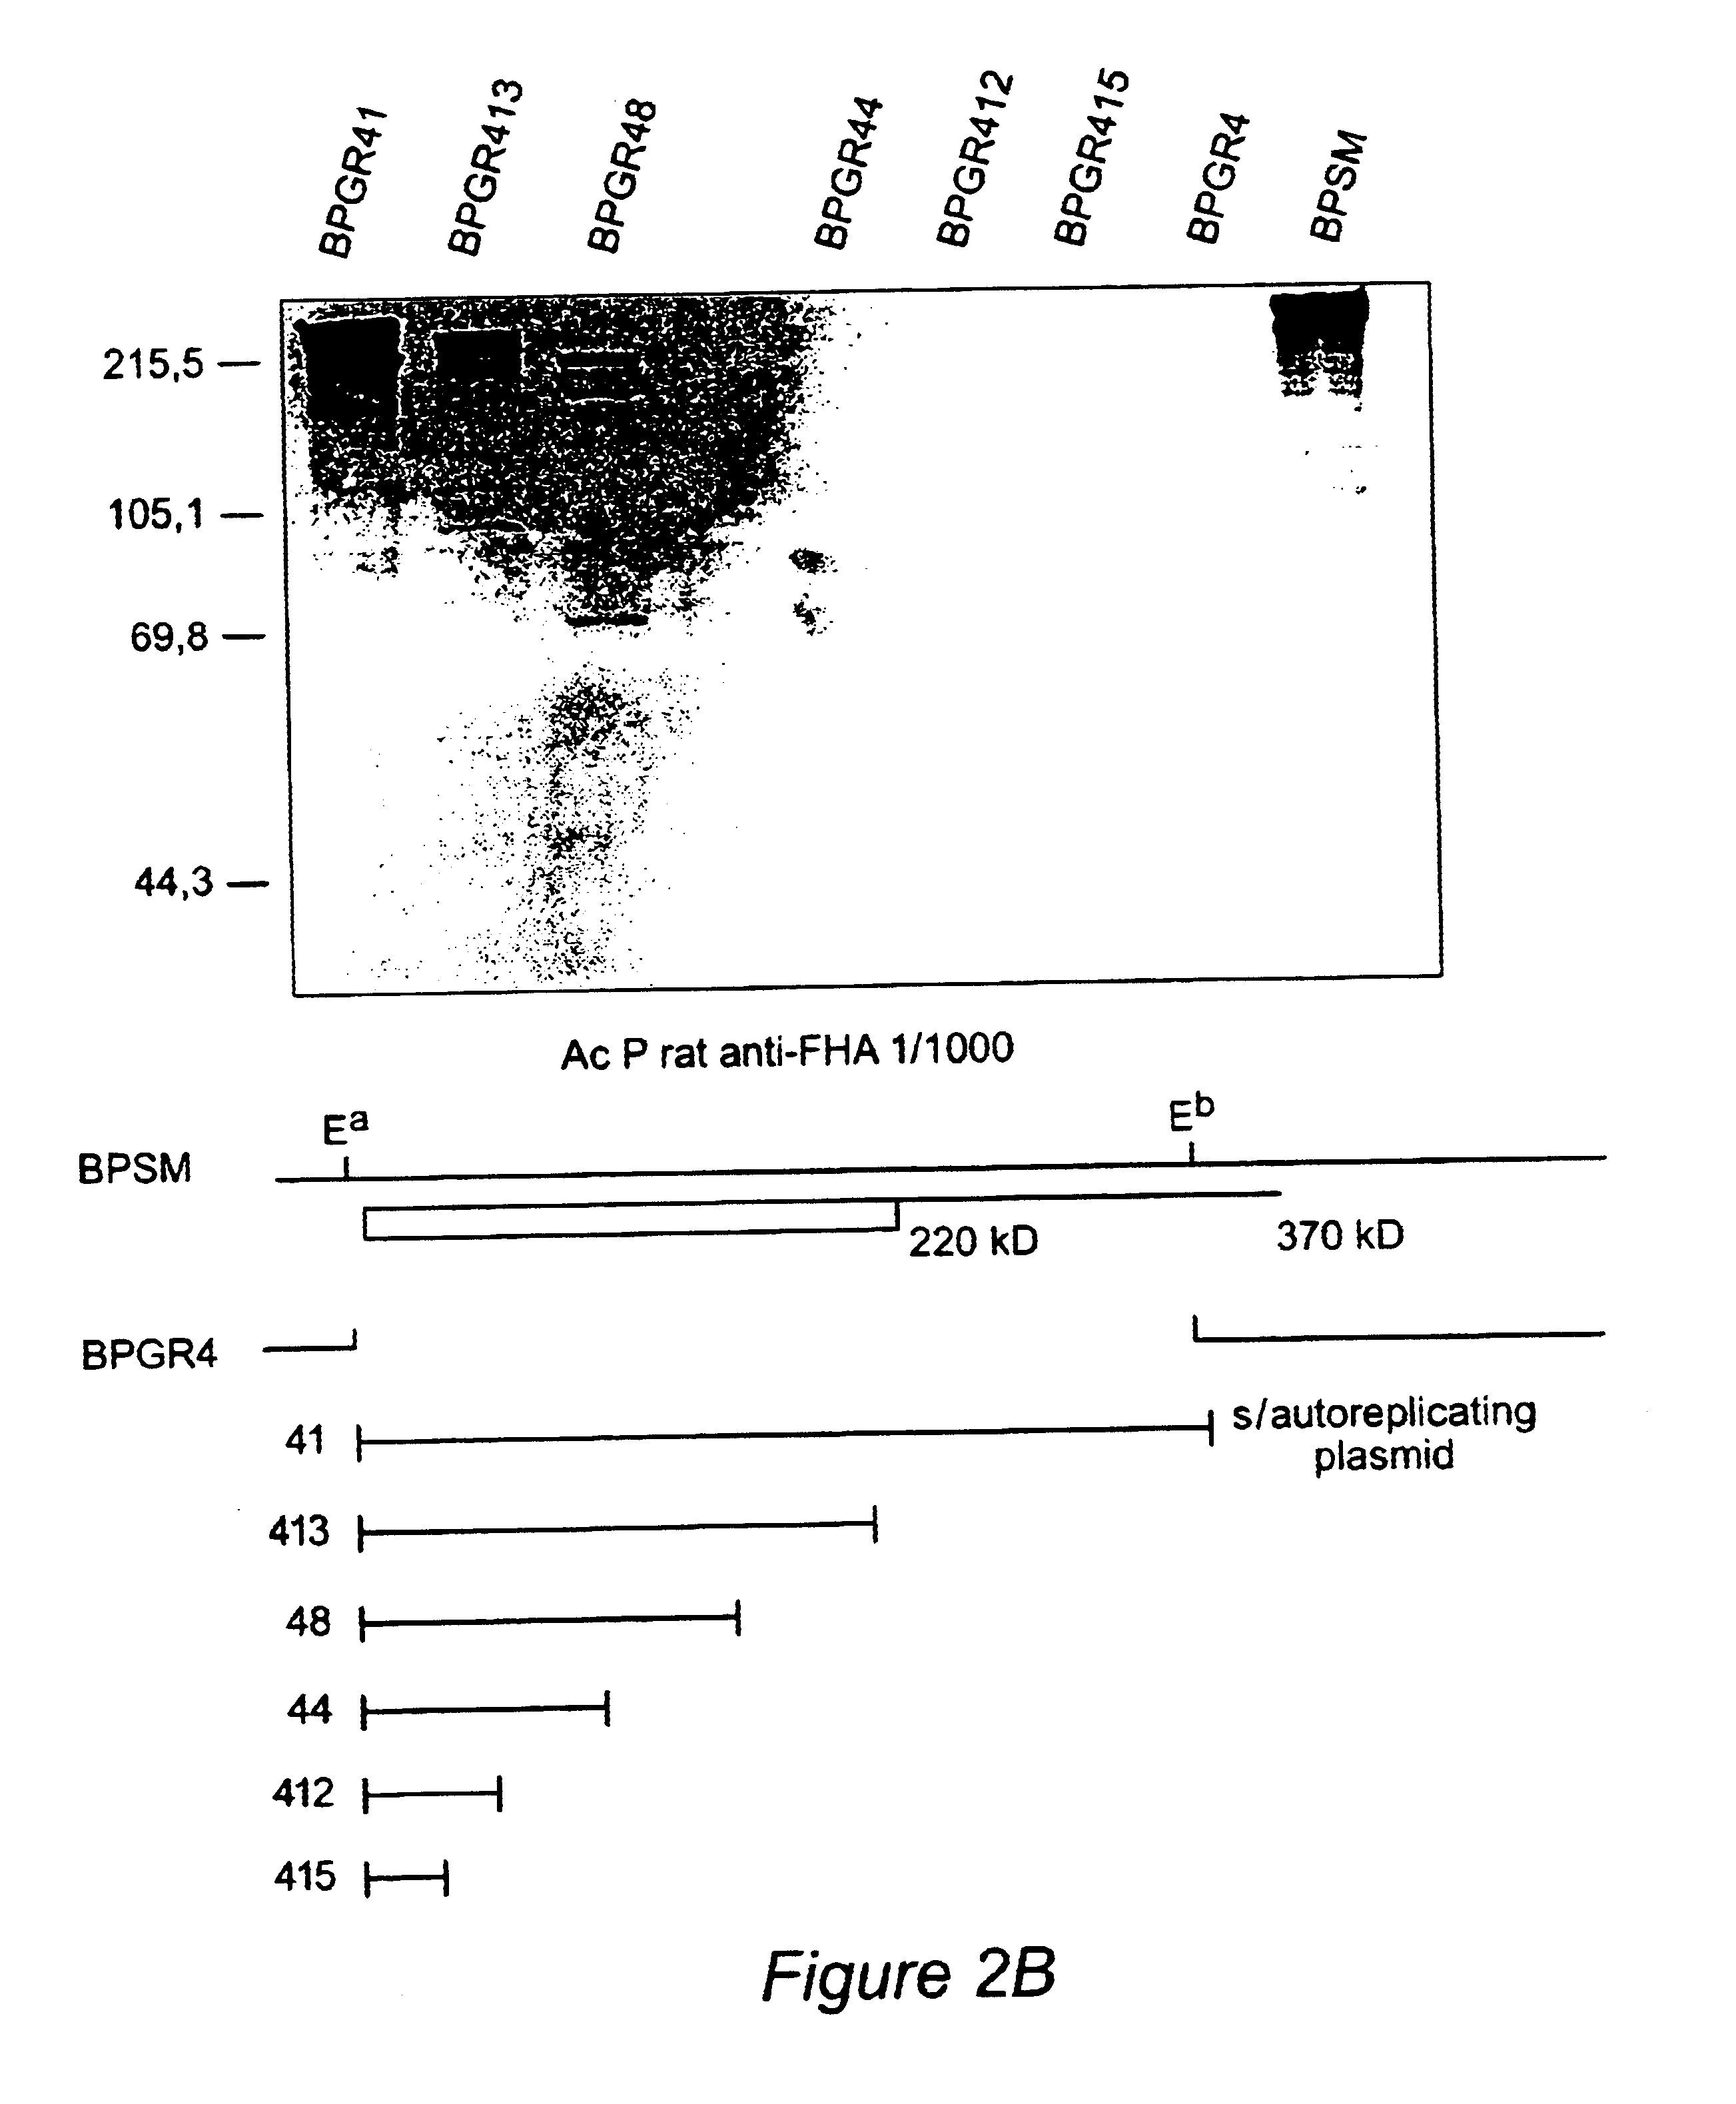 Recombinant proteins of filamentous haemagglutinin of bordetella, particularly bordetella pertussis, method for producing same, and uses thereof for producing foreign proteins of vaccinating active principles